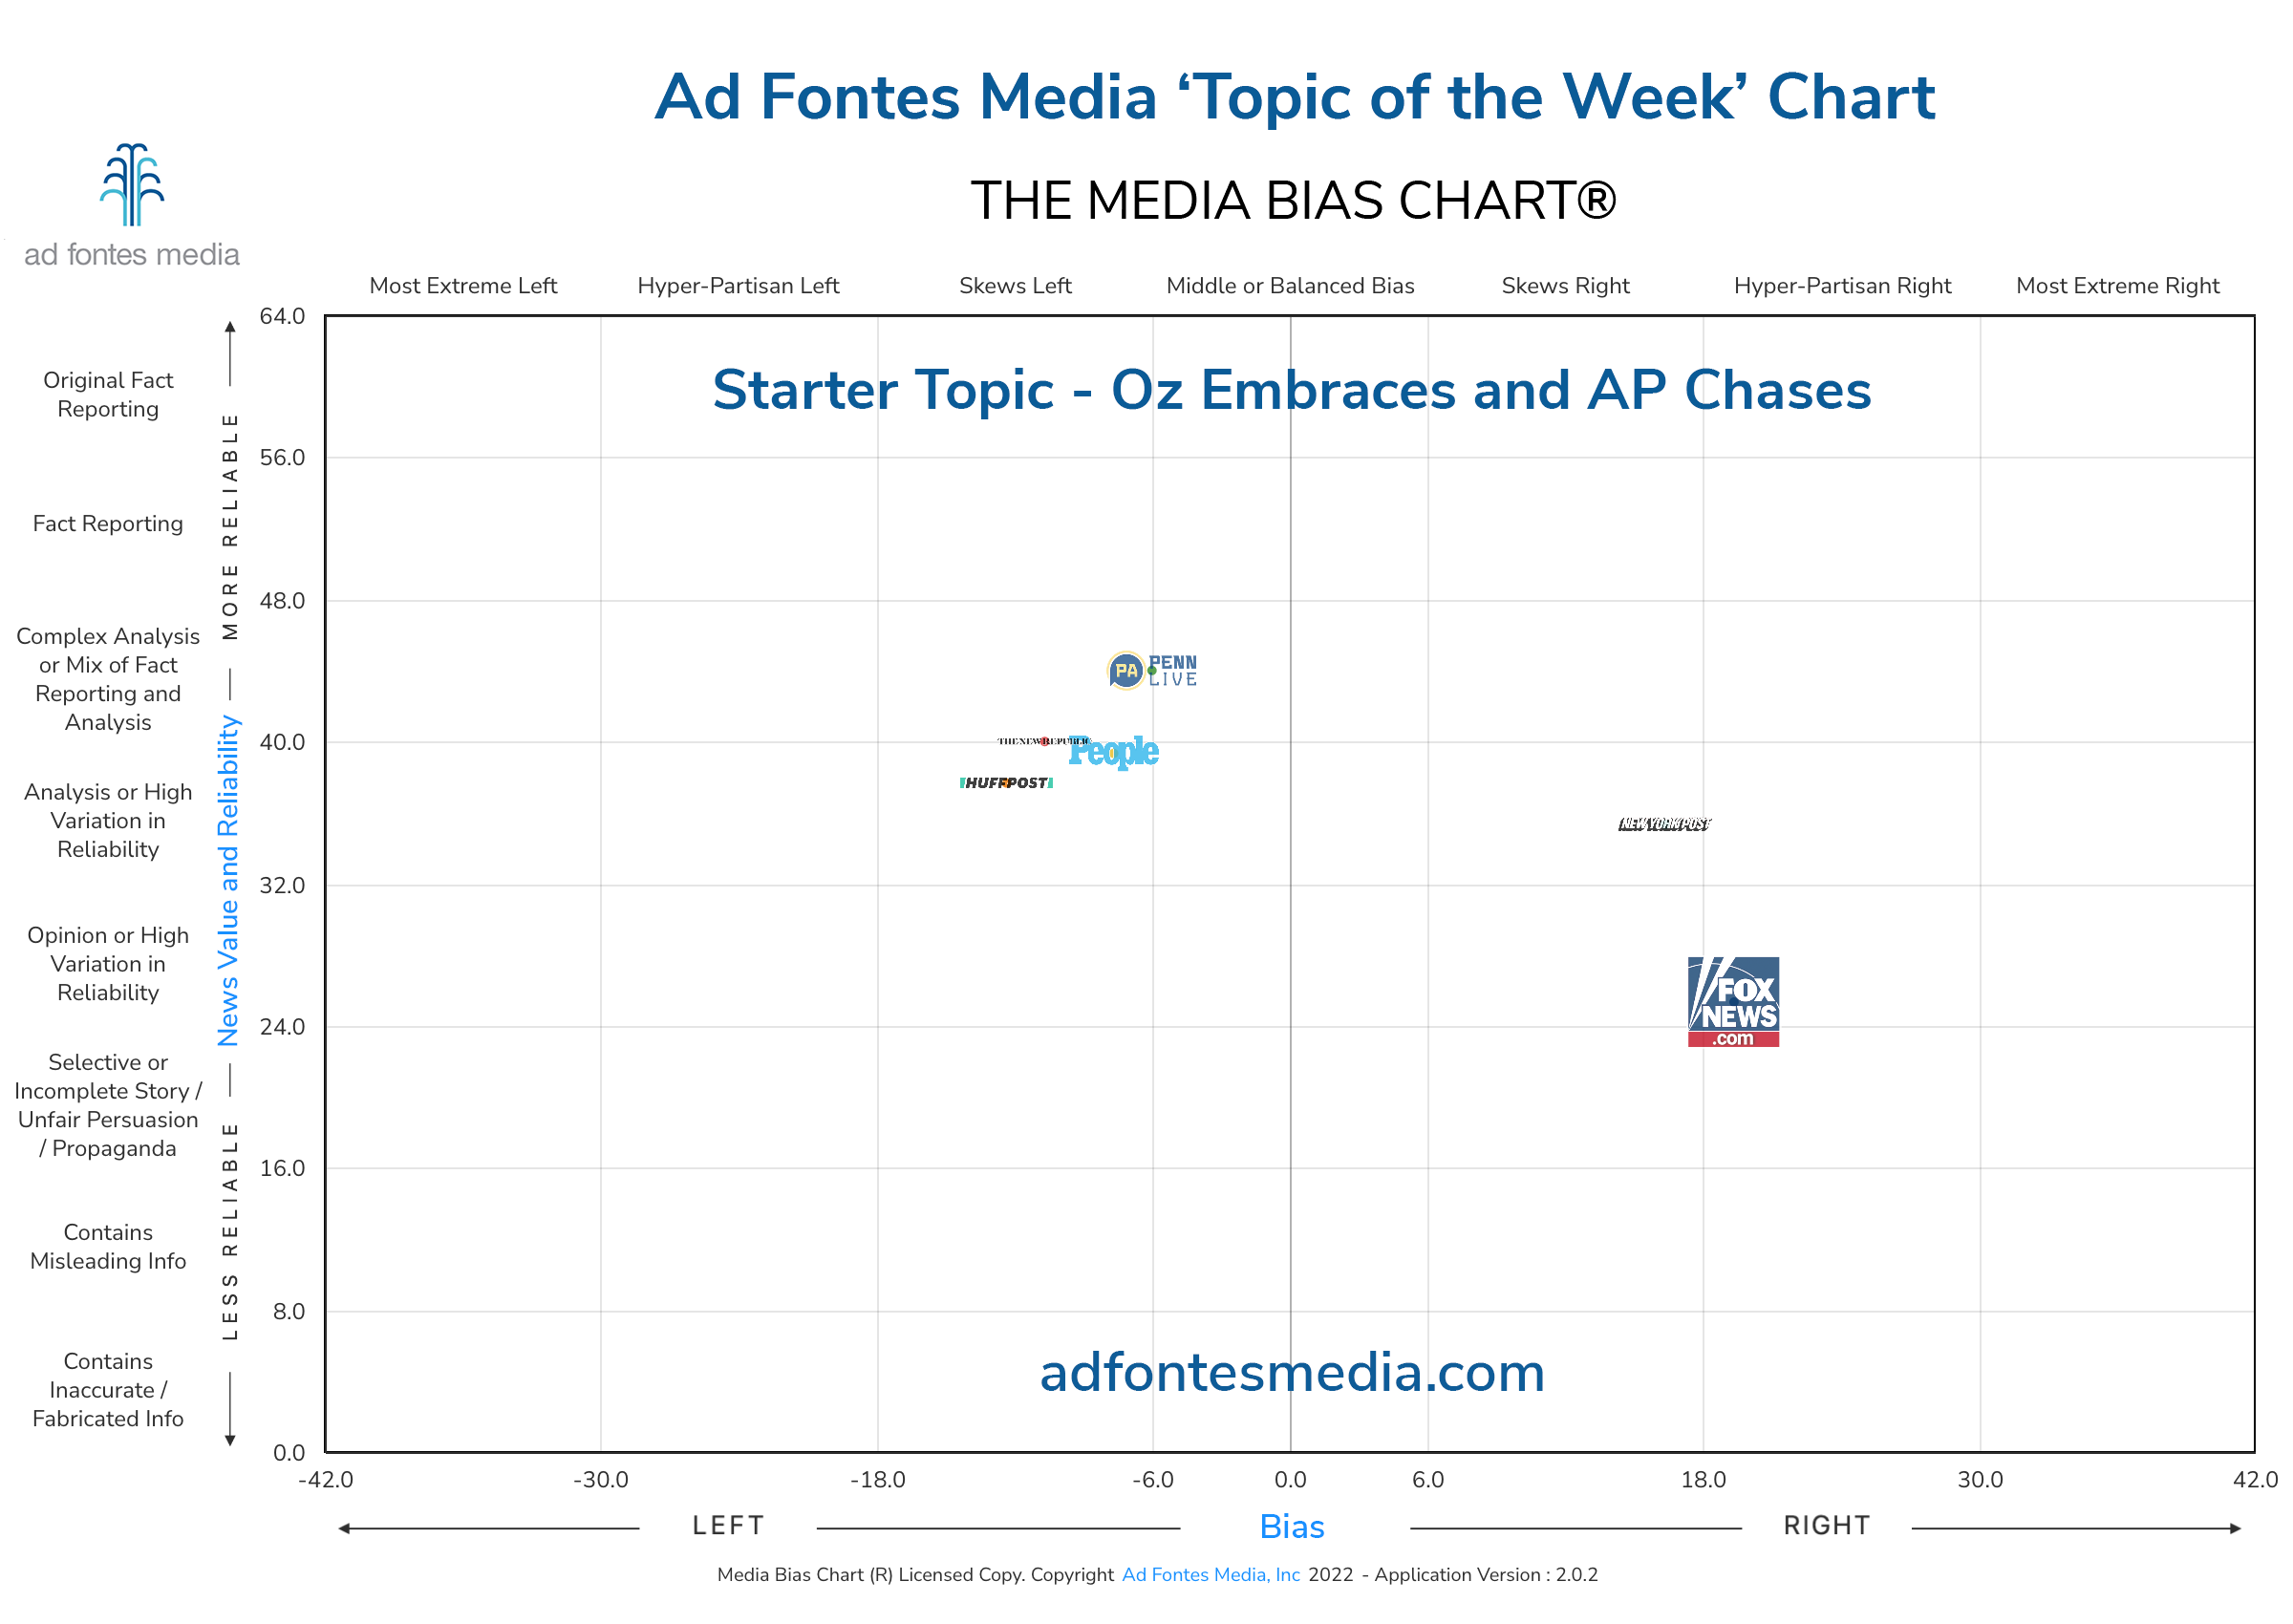 Scores for the Oz Embraces and AP Chases articles on the chart